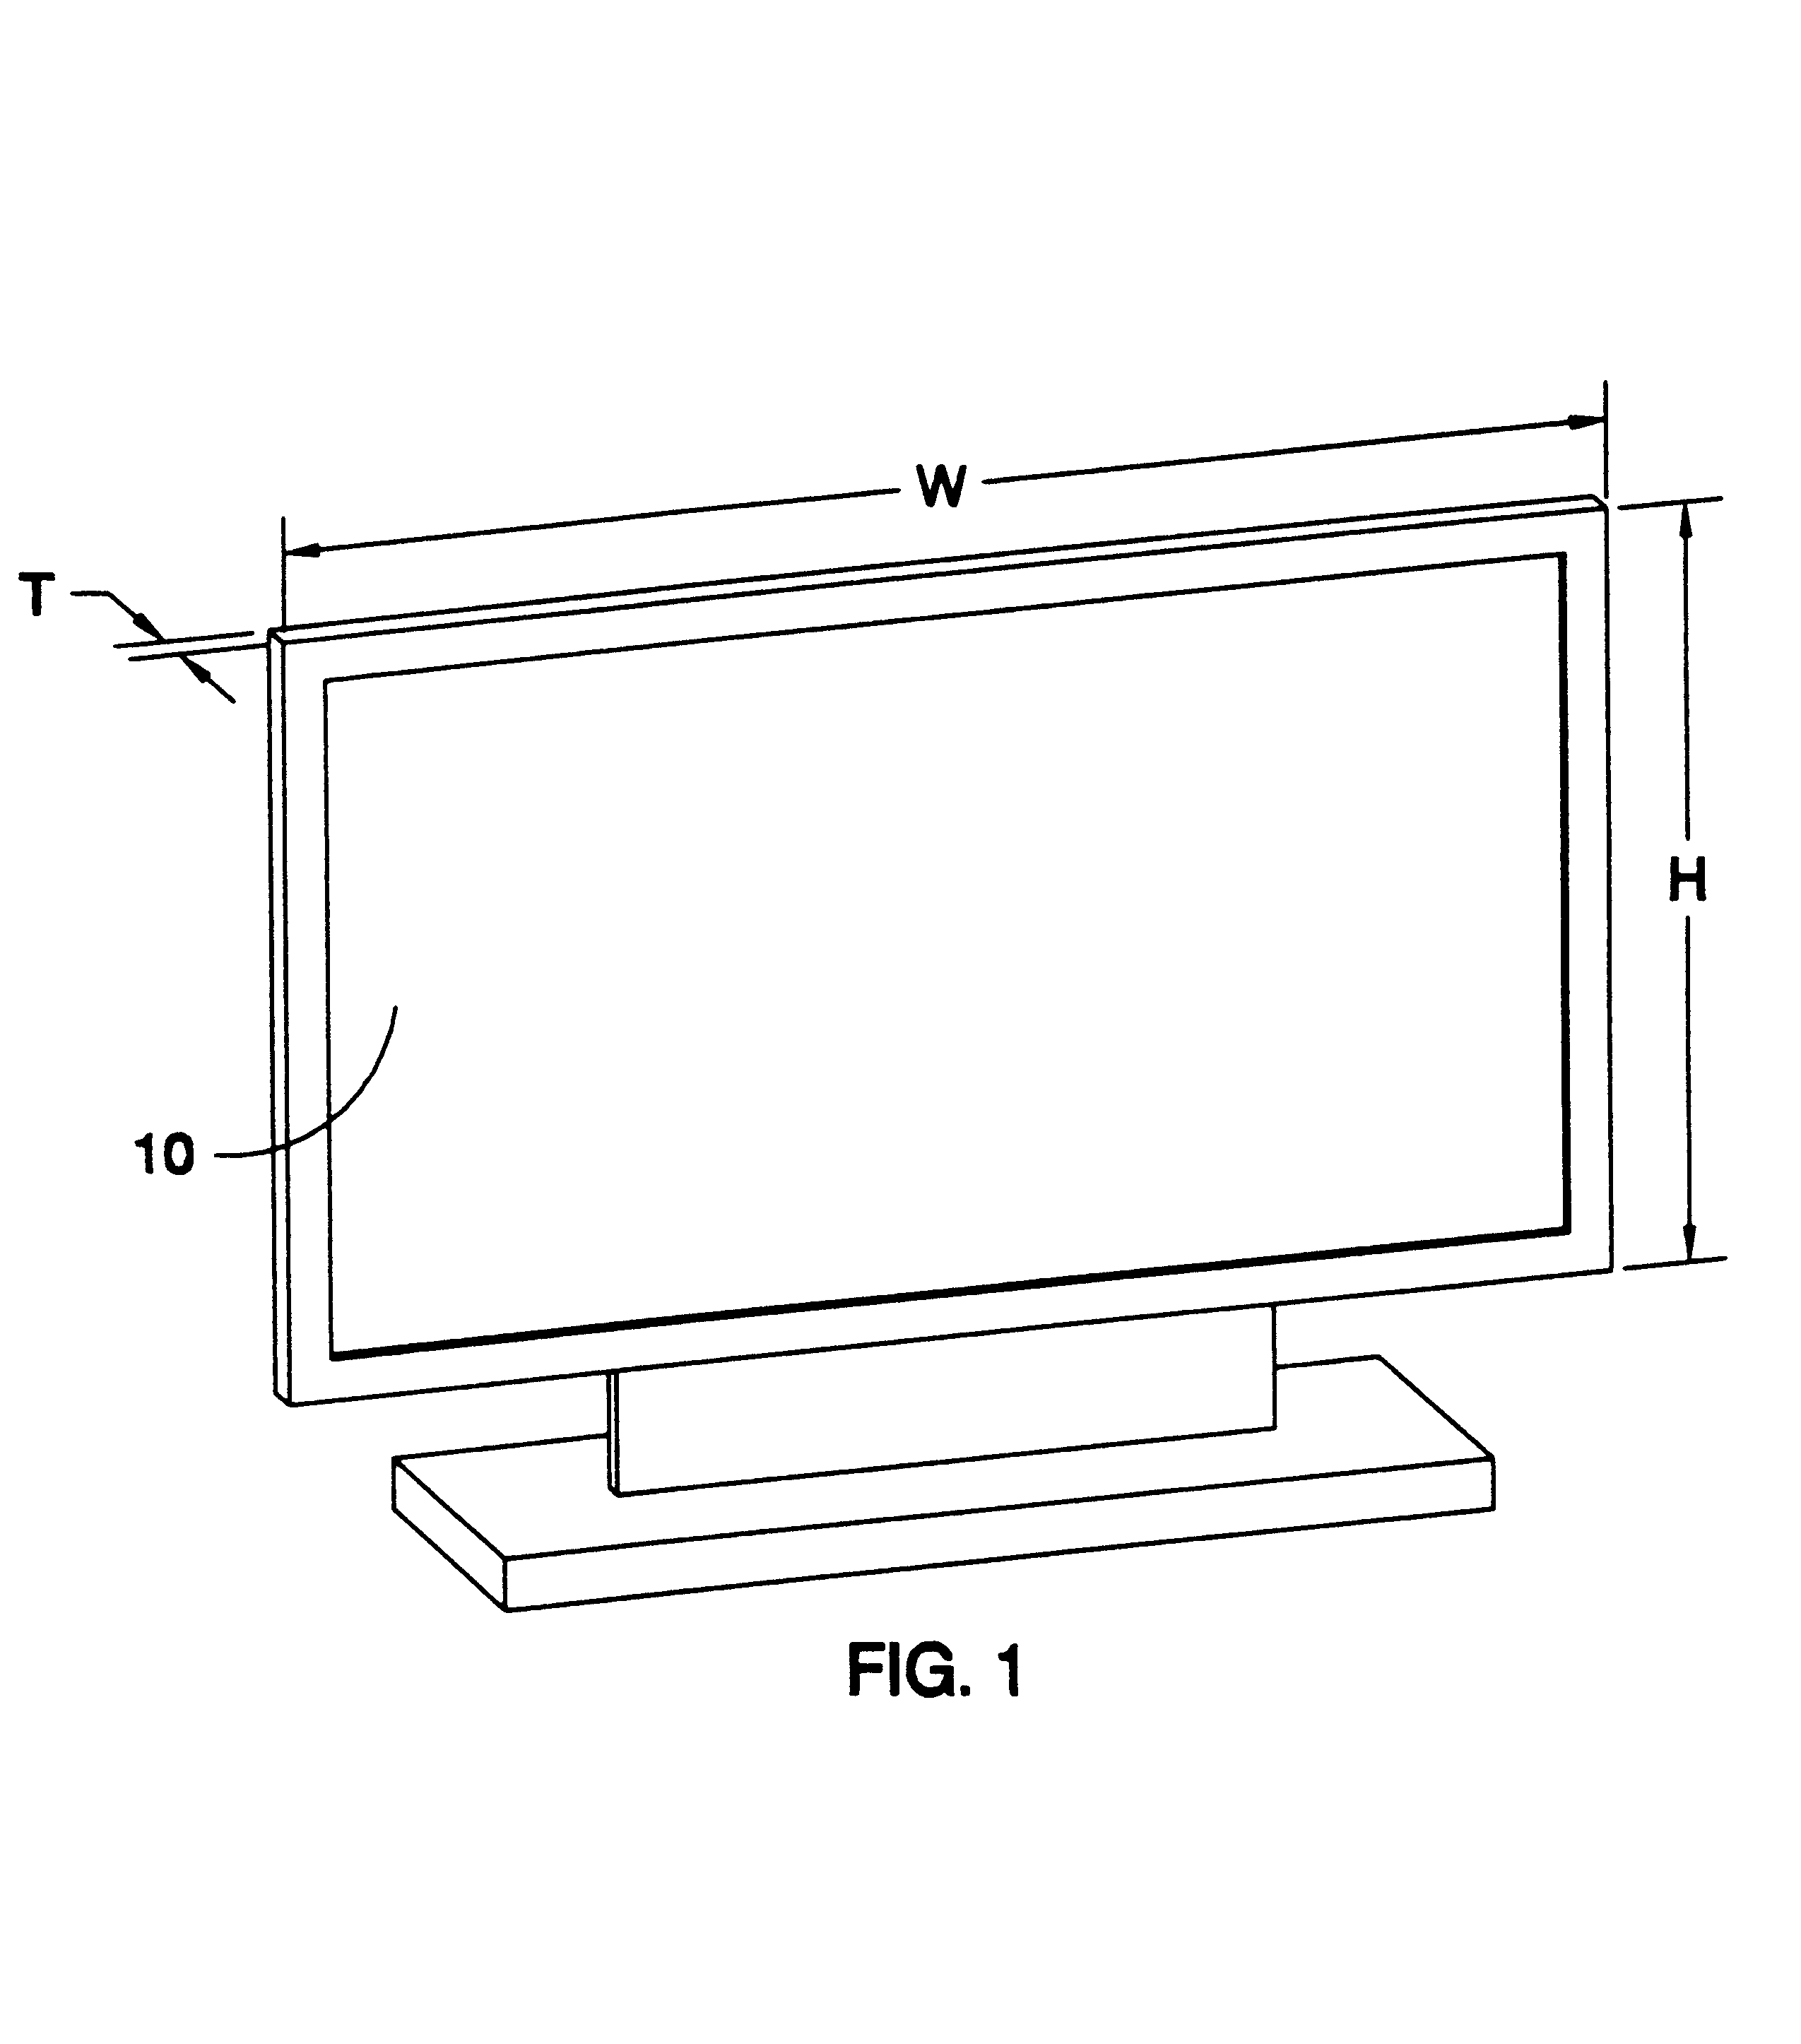 Optical device utilizing optical waveguides and mechanical light-switches